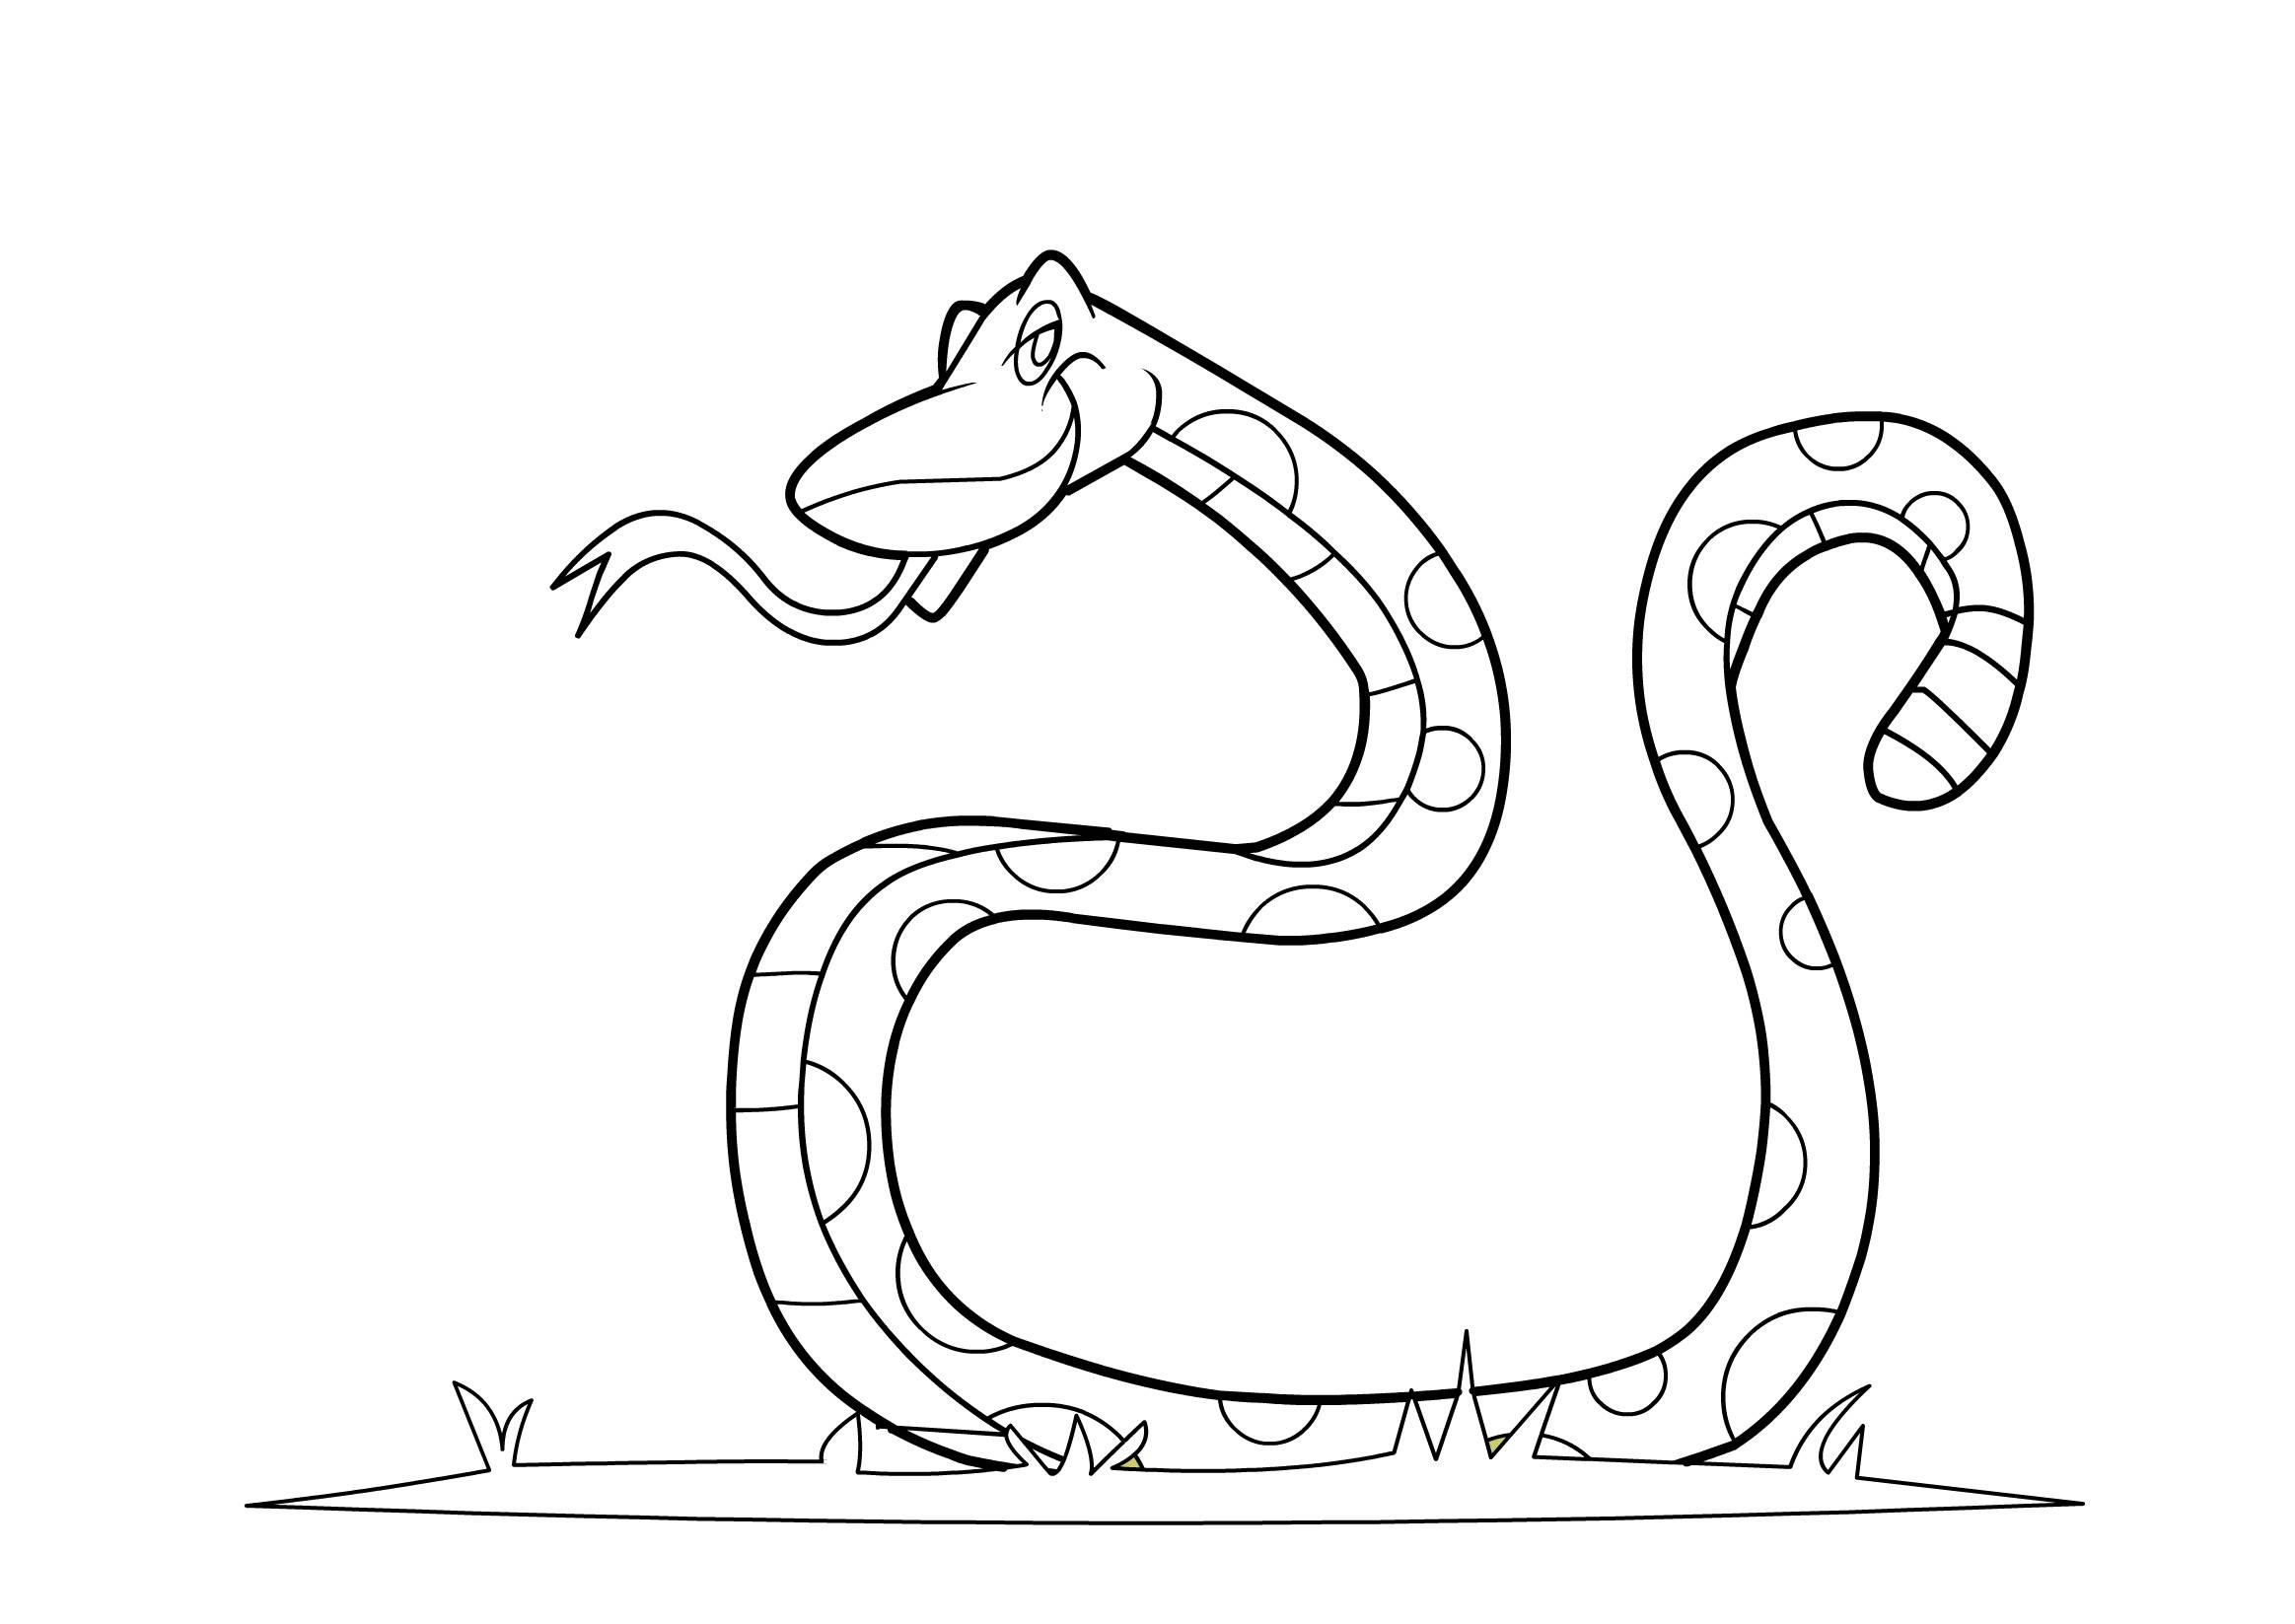 free-printable-snake-coloring-pages-for-kids